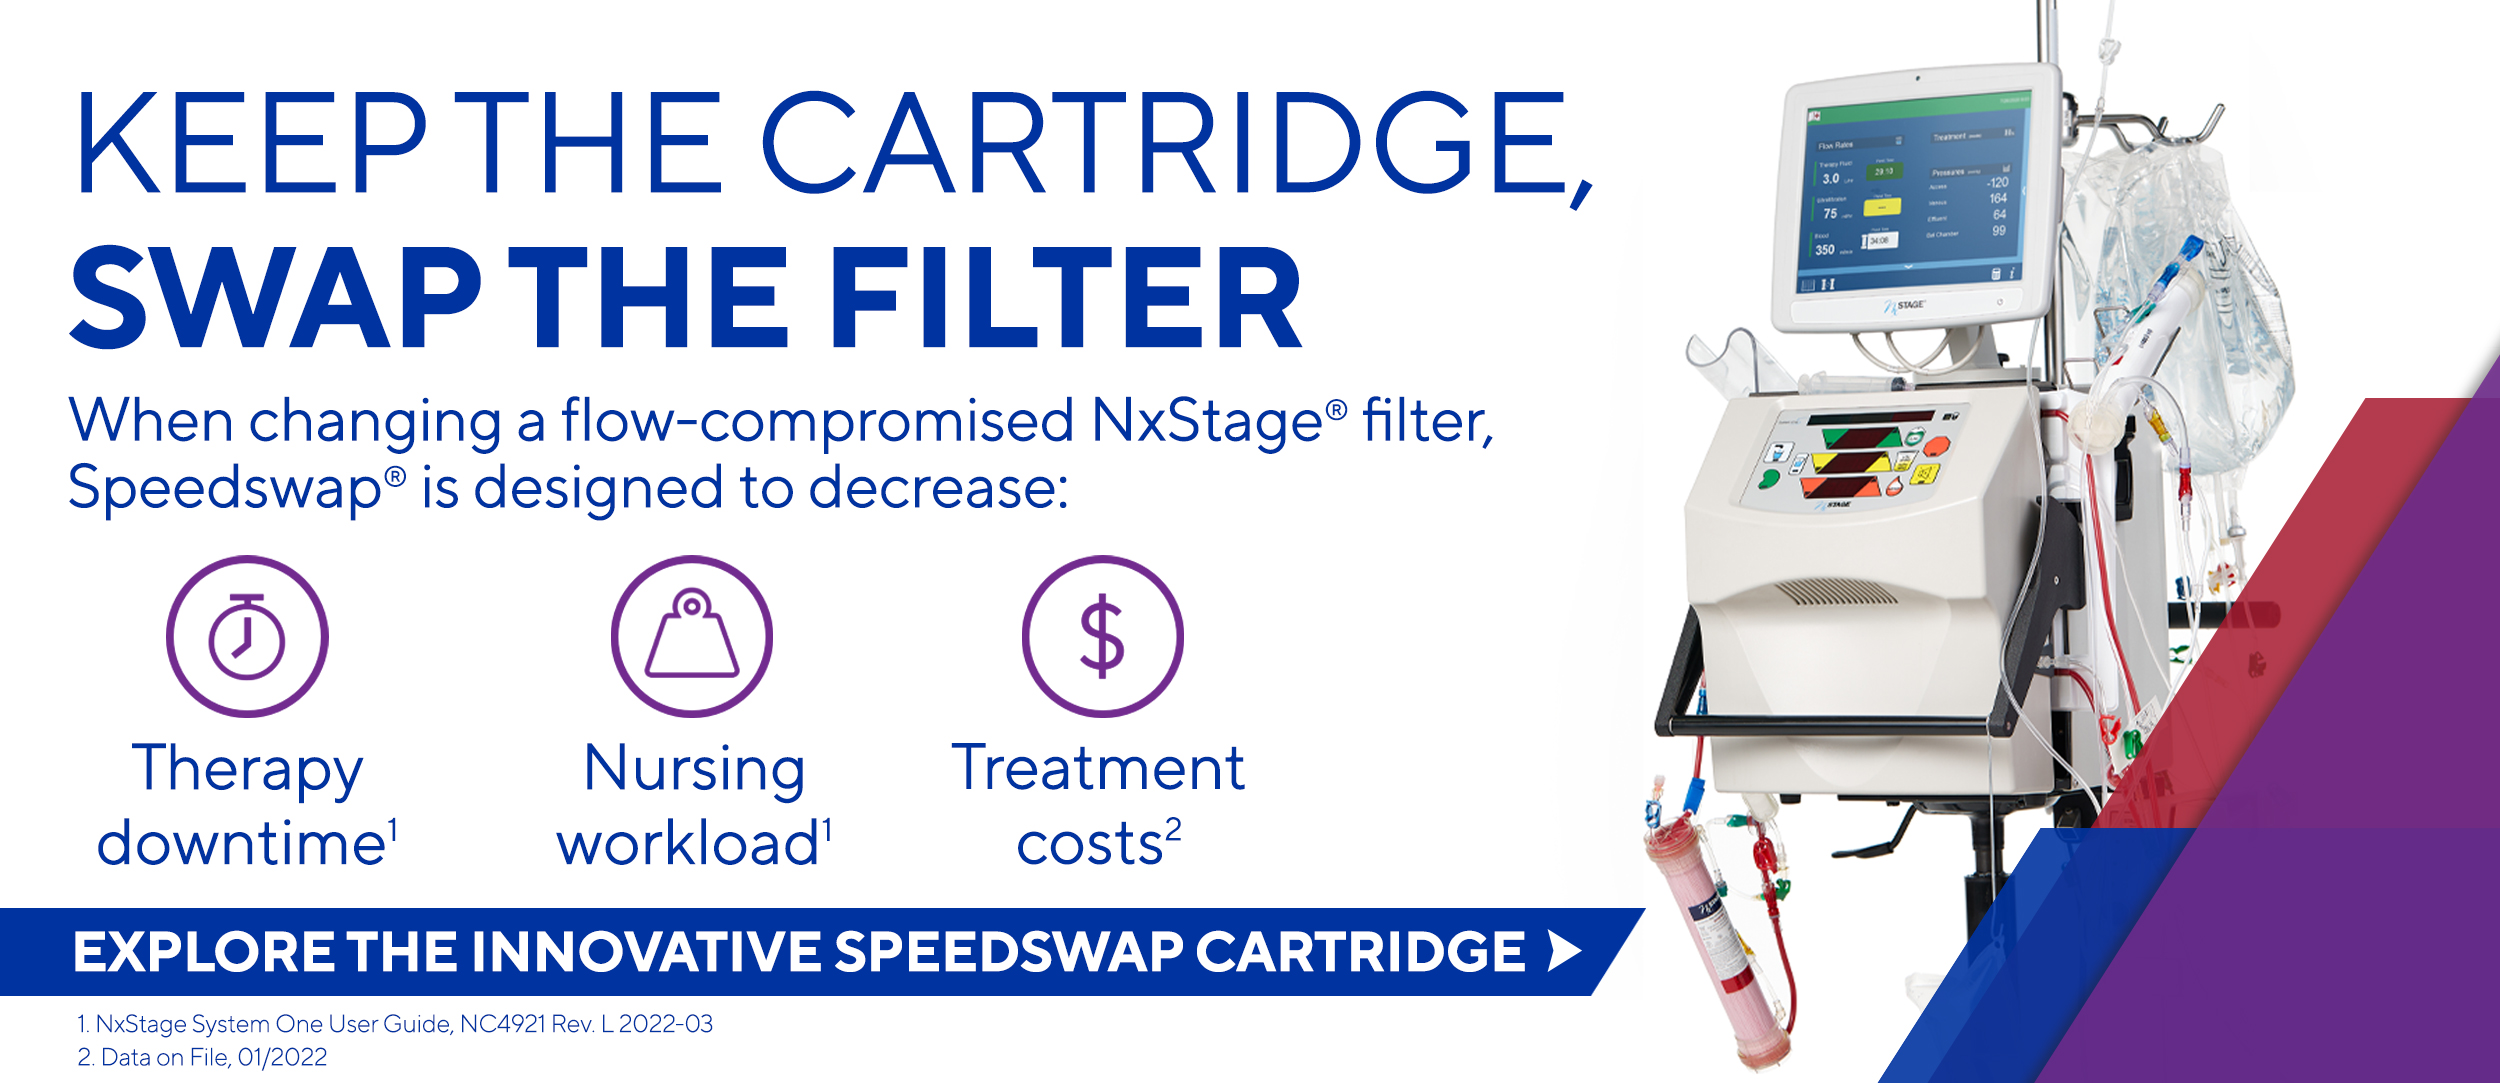 NxStage from Fresenius Medical Care Launches Speedswap for Critical Care Dialysis